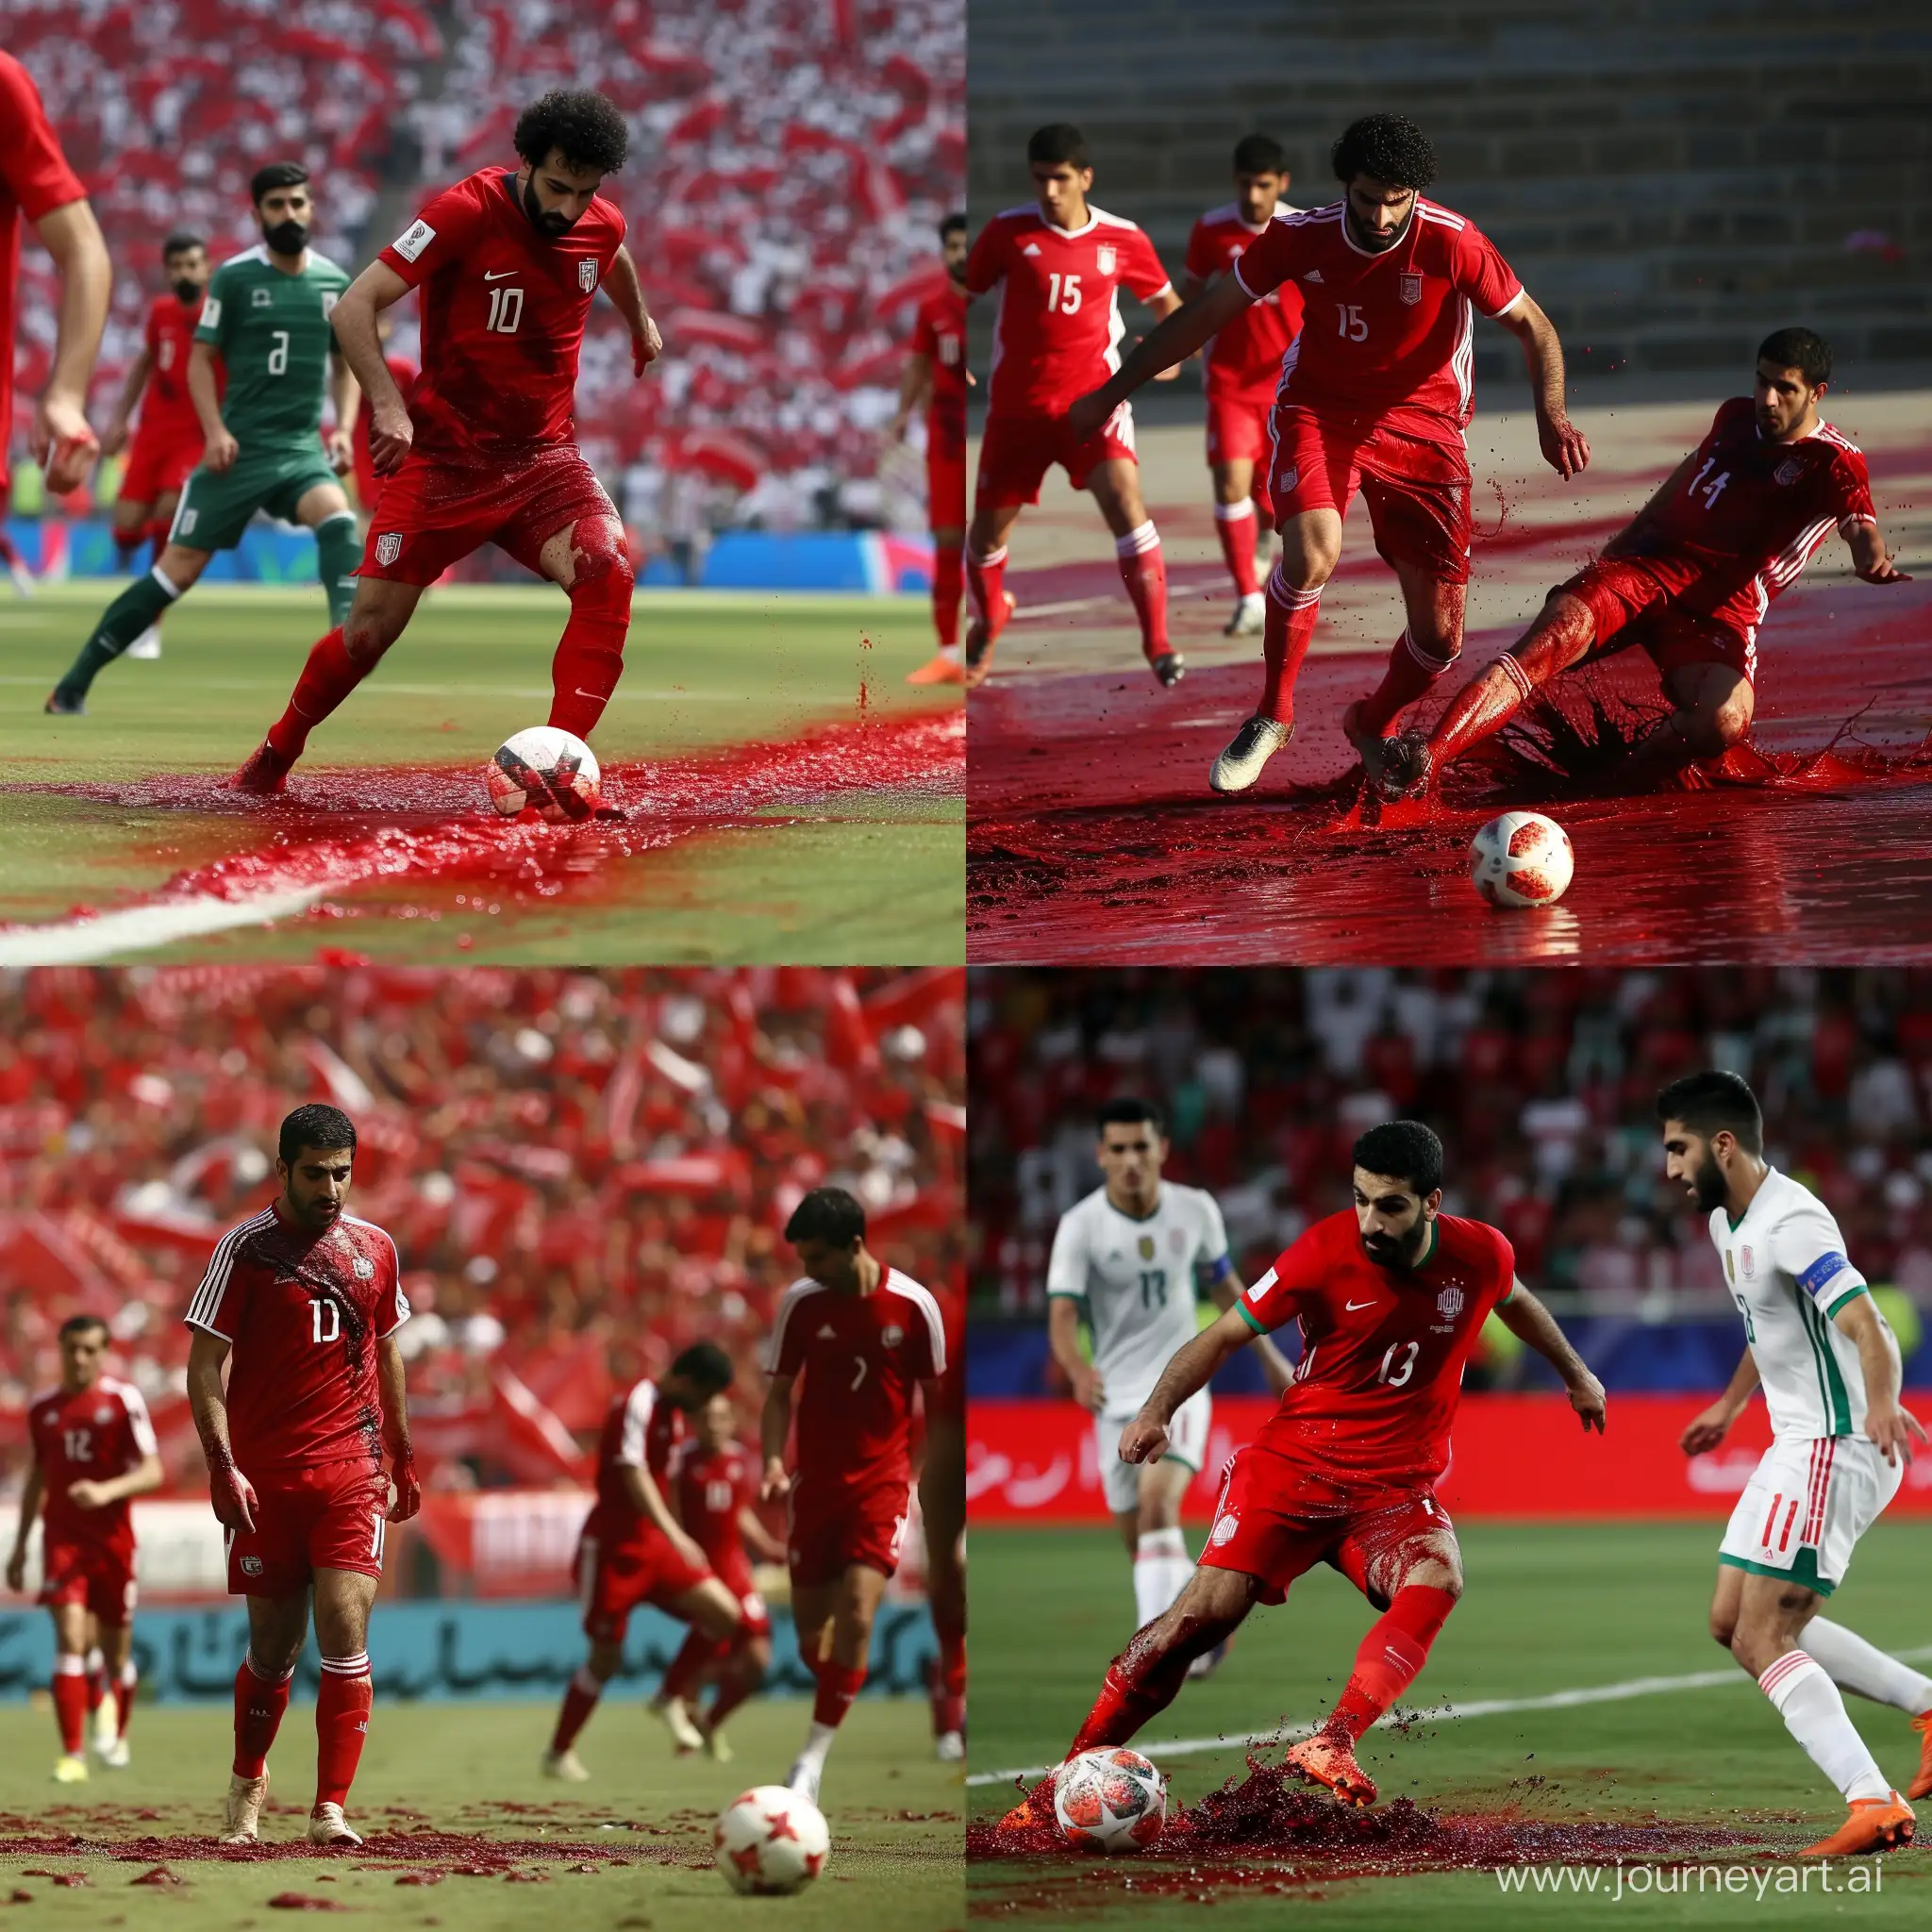 Intense-Iranian-National-Soccer-Team-Match-in-Striking-Blood-Red-Arena